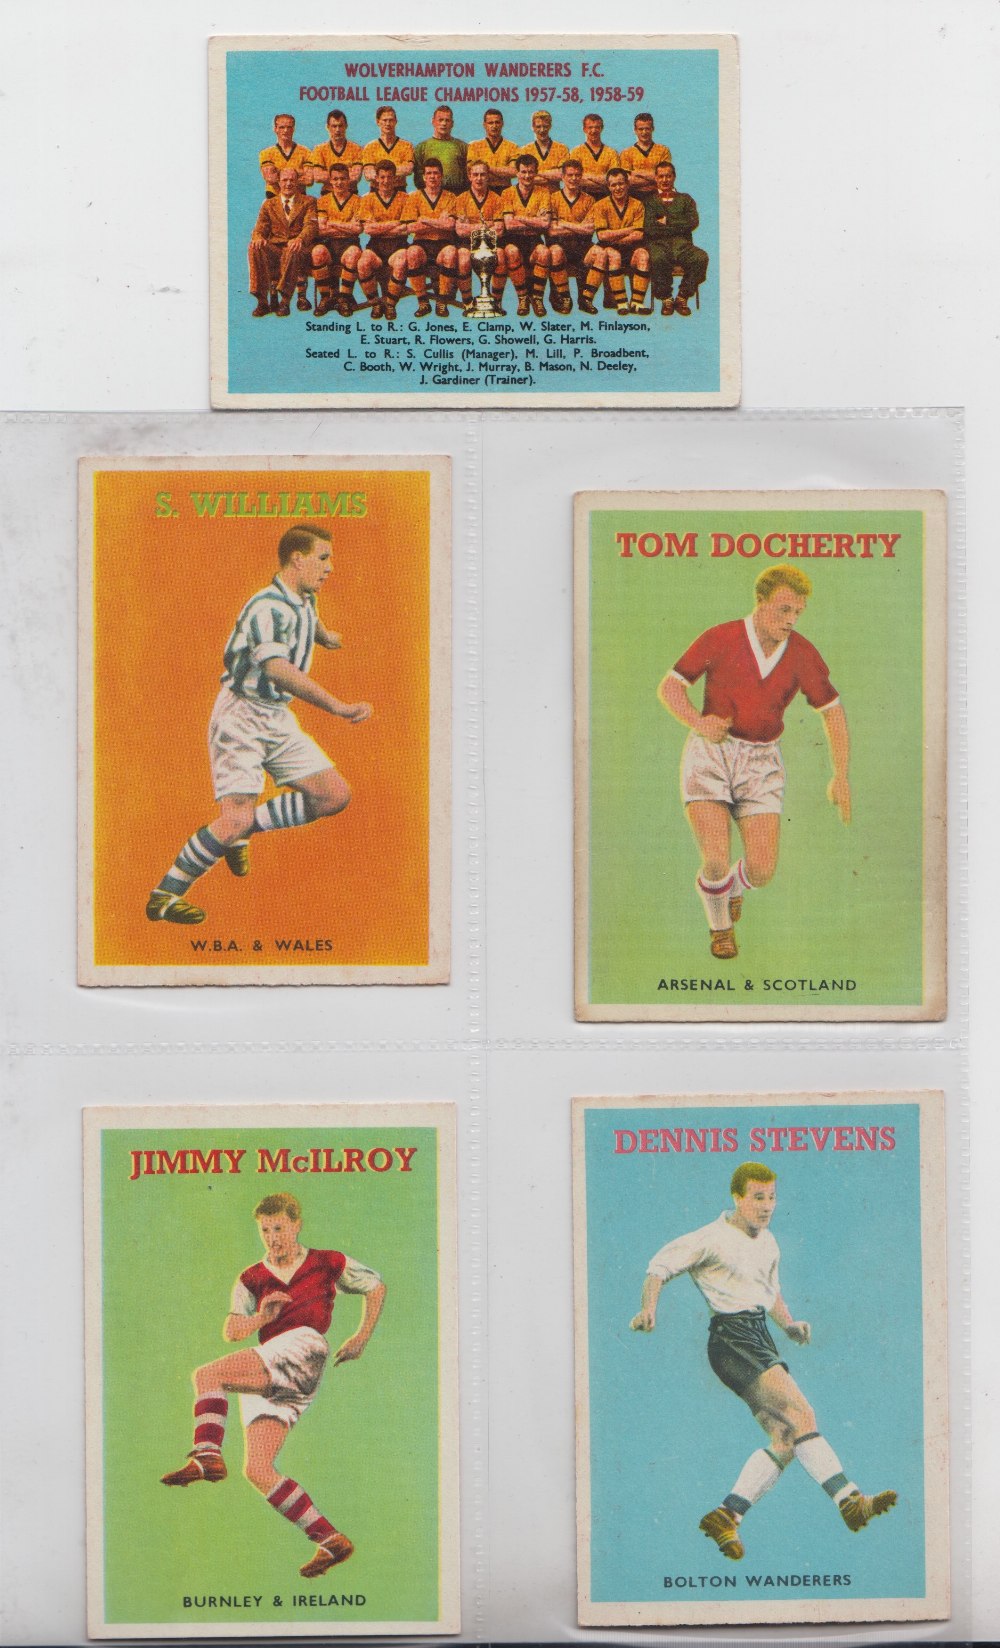 Trade cards, A&BC Gum, Footballers, Quiz 1-49 (set, 49 cards) (gd/vg, checklist unmarked) (49)